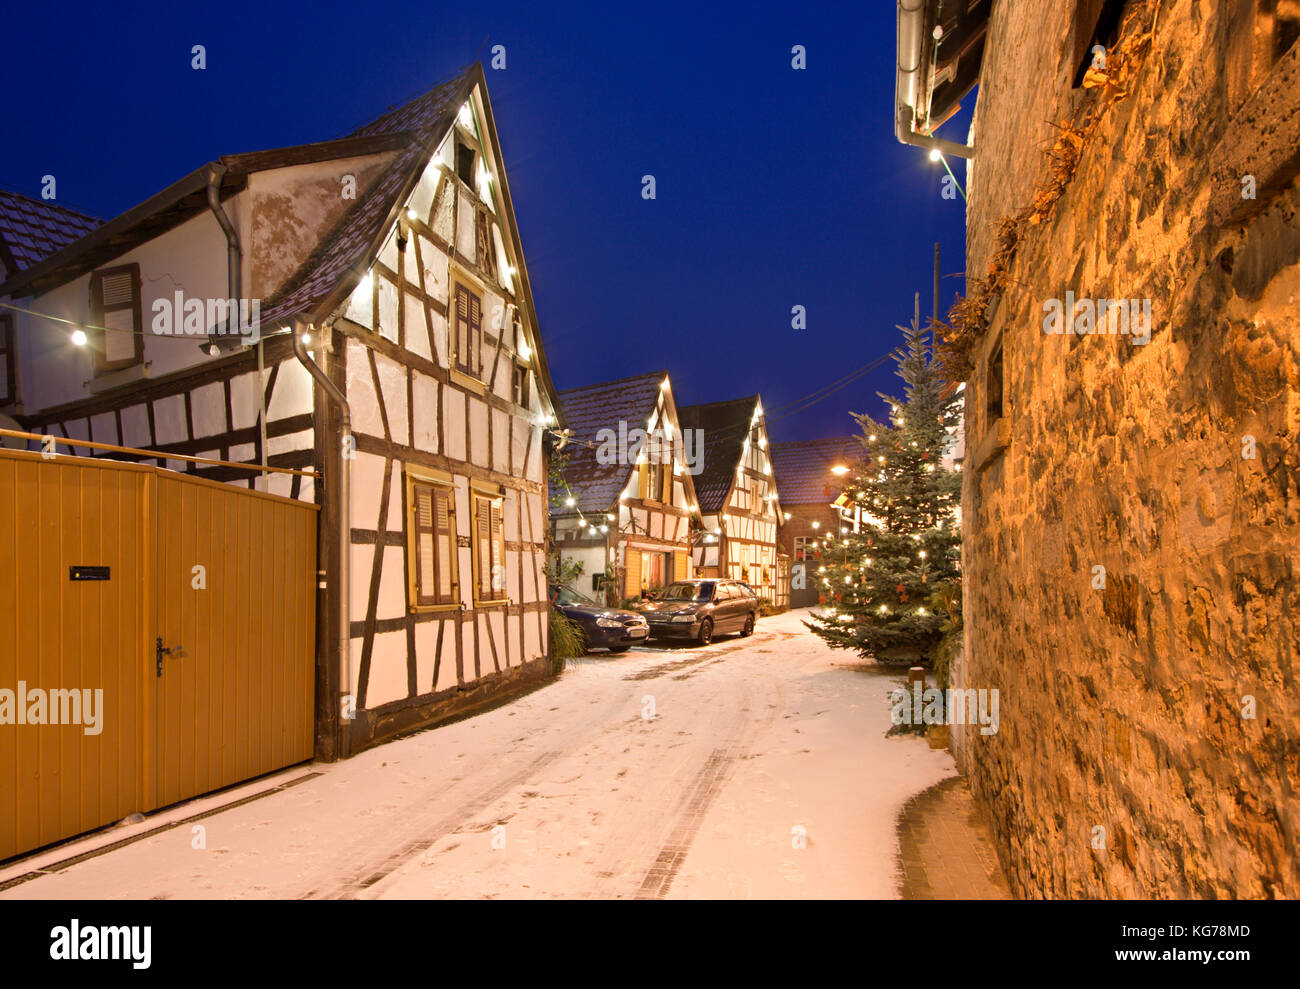 A christmassy decorated street in a small german village in Lachen, Neustadt an der Weinstrasse, Germany. Stock Photo